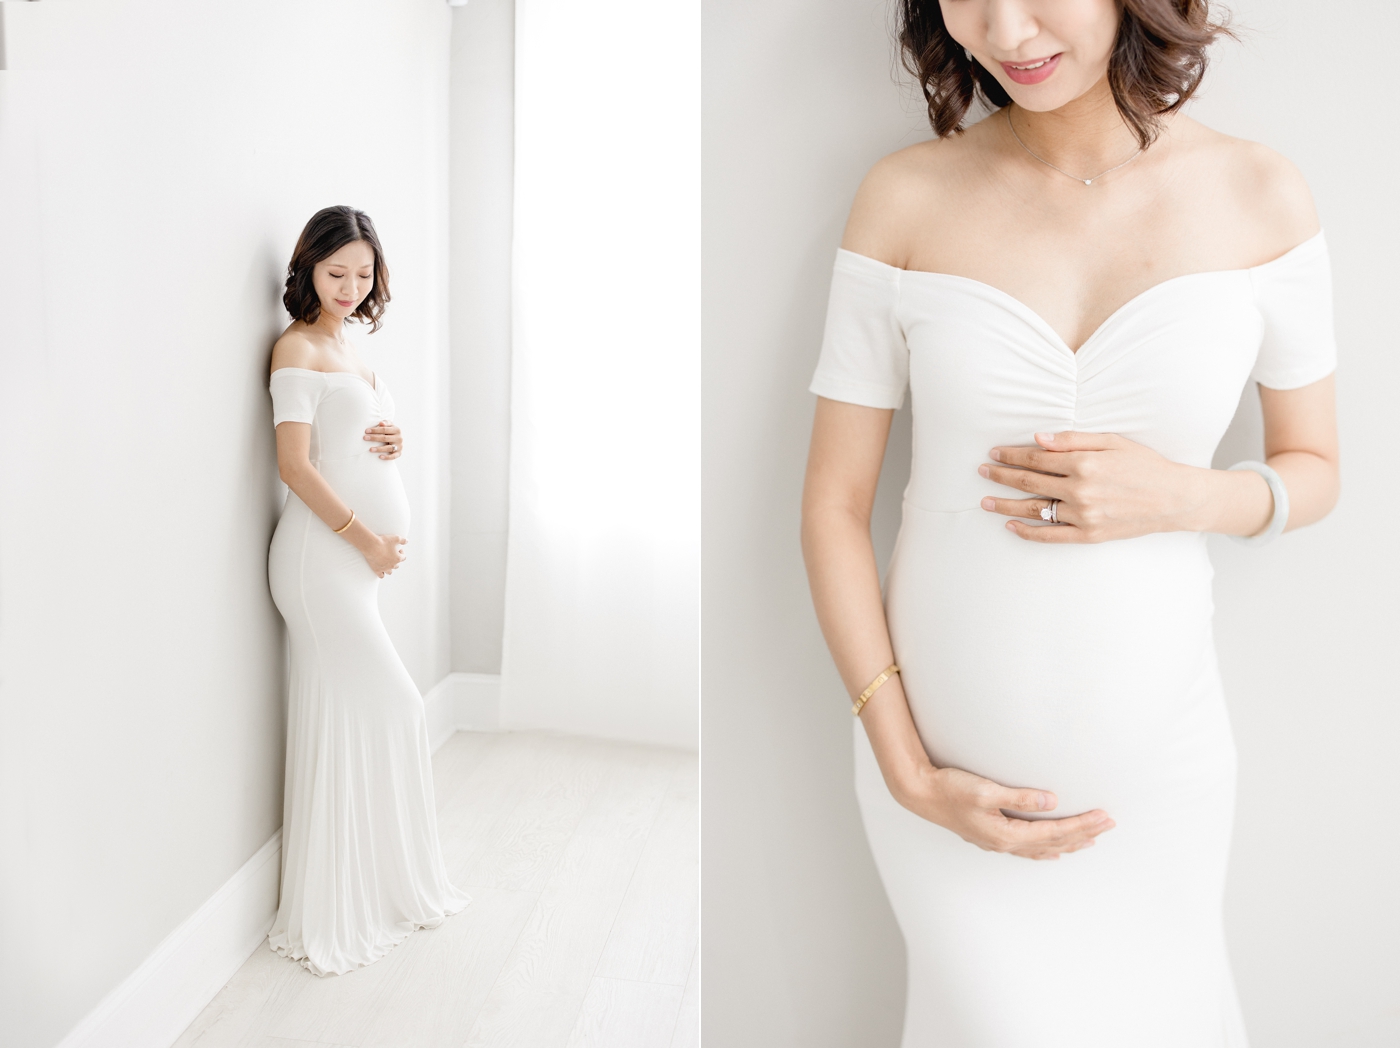 Expecting Mom wearing white fitted dress for a studio maternity session. Photo by Brittany Elise Photography.